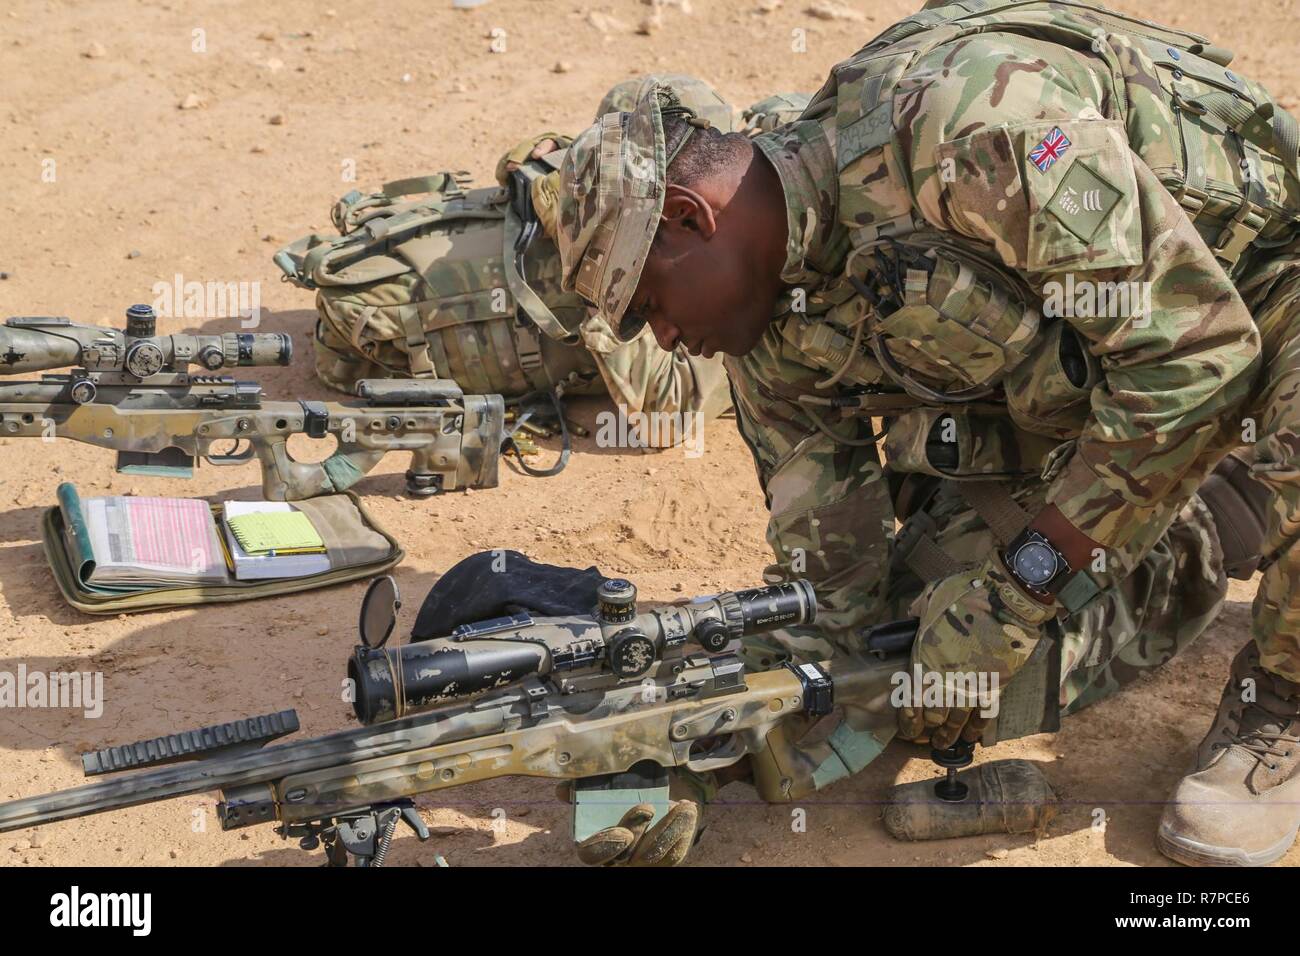 A British trainer deployed in support of Combined Joint Task Force – Operation Inherent Resolve and assigned to The Highlanders, 4th Battalion, The Royal Regiment of Scotland (4 Scots) loads a magazine into his L115A3 Long Range rifle during sniper training at Al Asad Air Base, Iraq, March 21, 2017. This training is part of the overall CJTF – OIR building partner capacity mission by training and improving the capability of partnered forces fighting ISIS. CJTF – OIR is the global Coalition to defeat ISIS in Iraq and Syria. Stock Photo